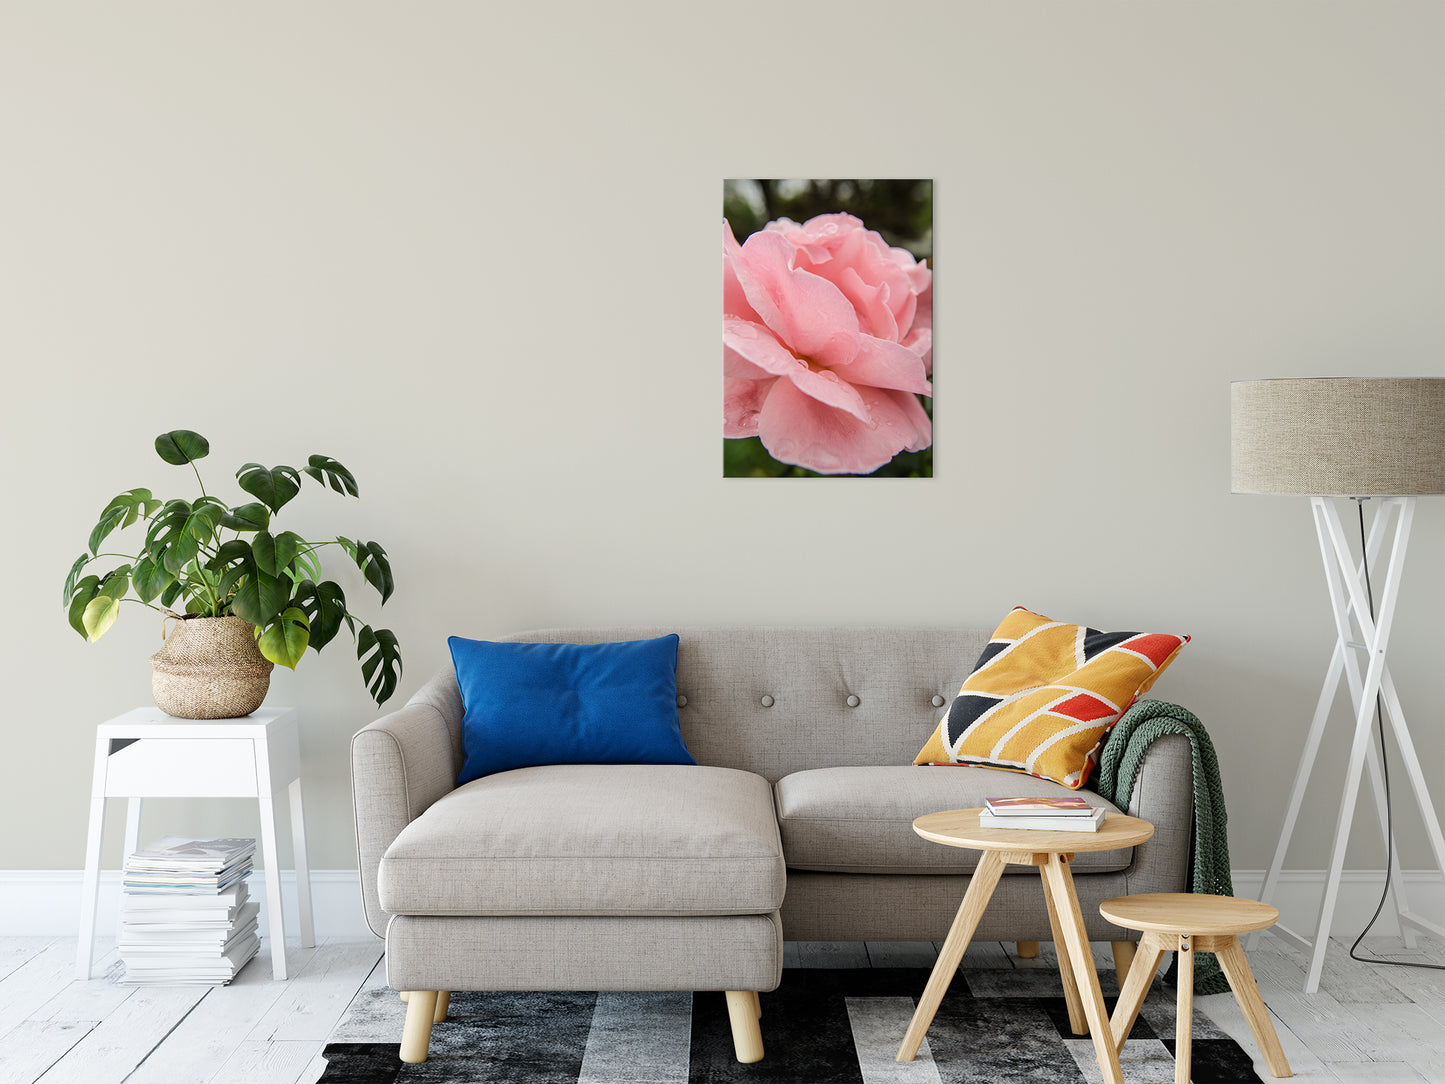 Pink Passion Nature / Floral Photo Fine Art Canvas Wall Art Prints 20" x 30" - PIPAFINEART